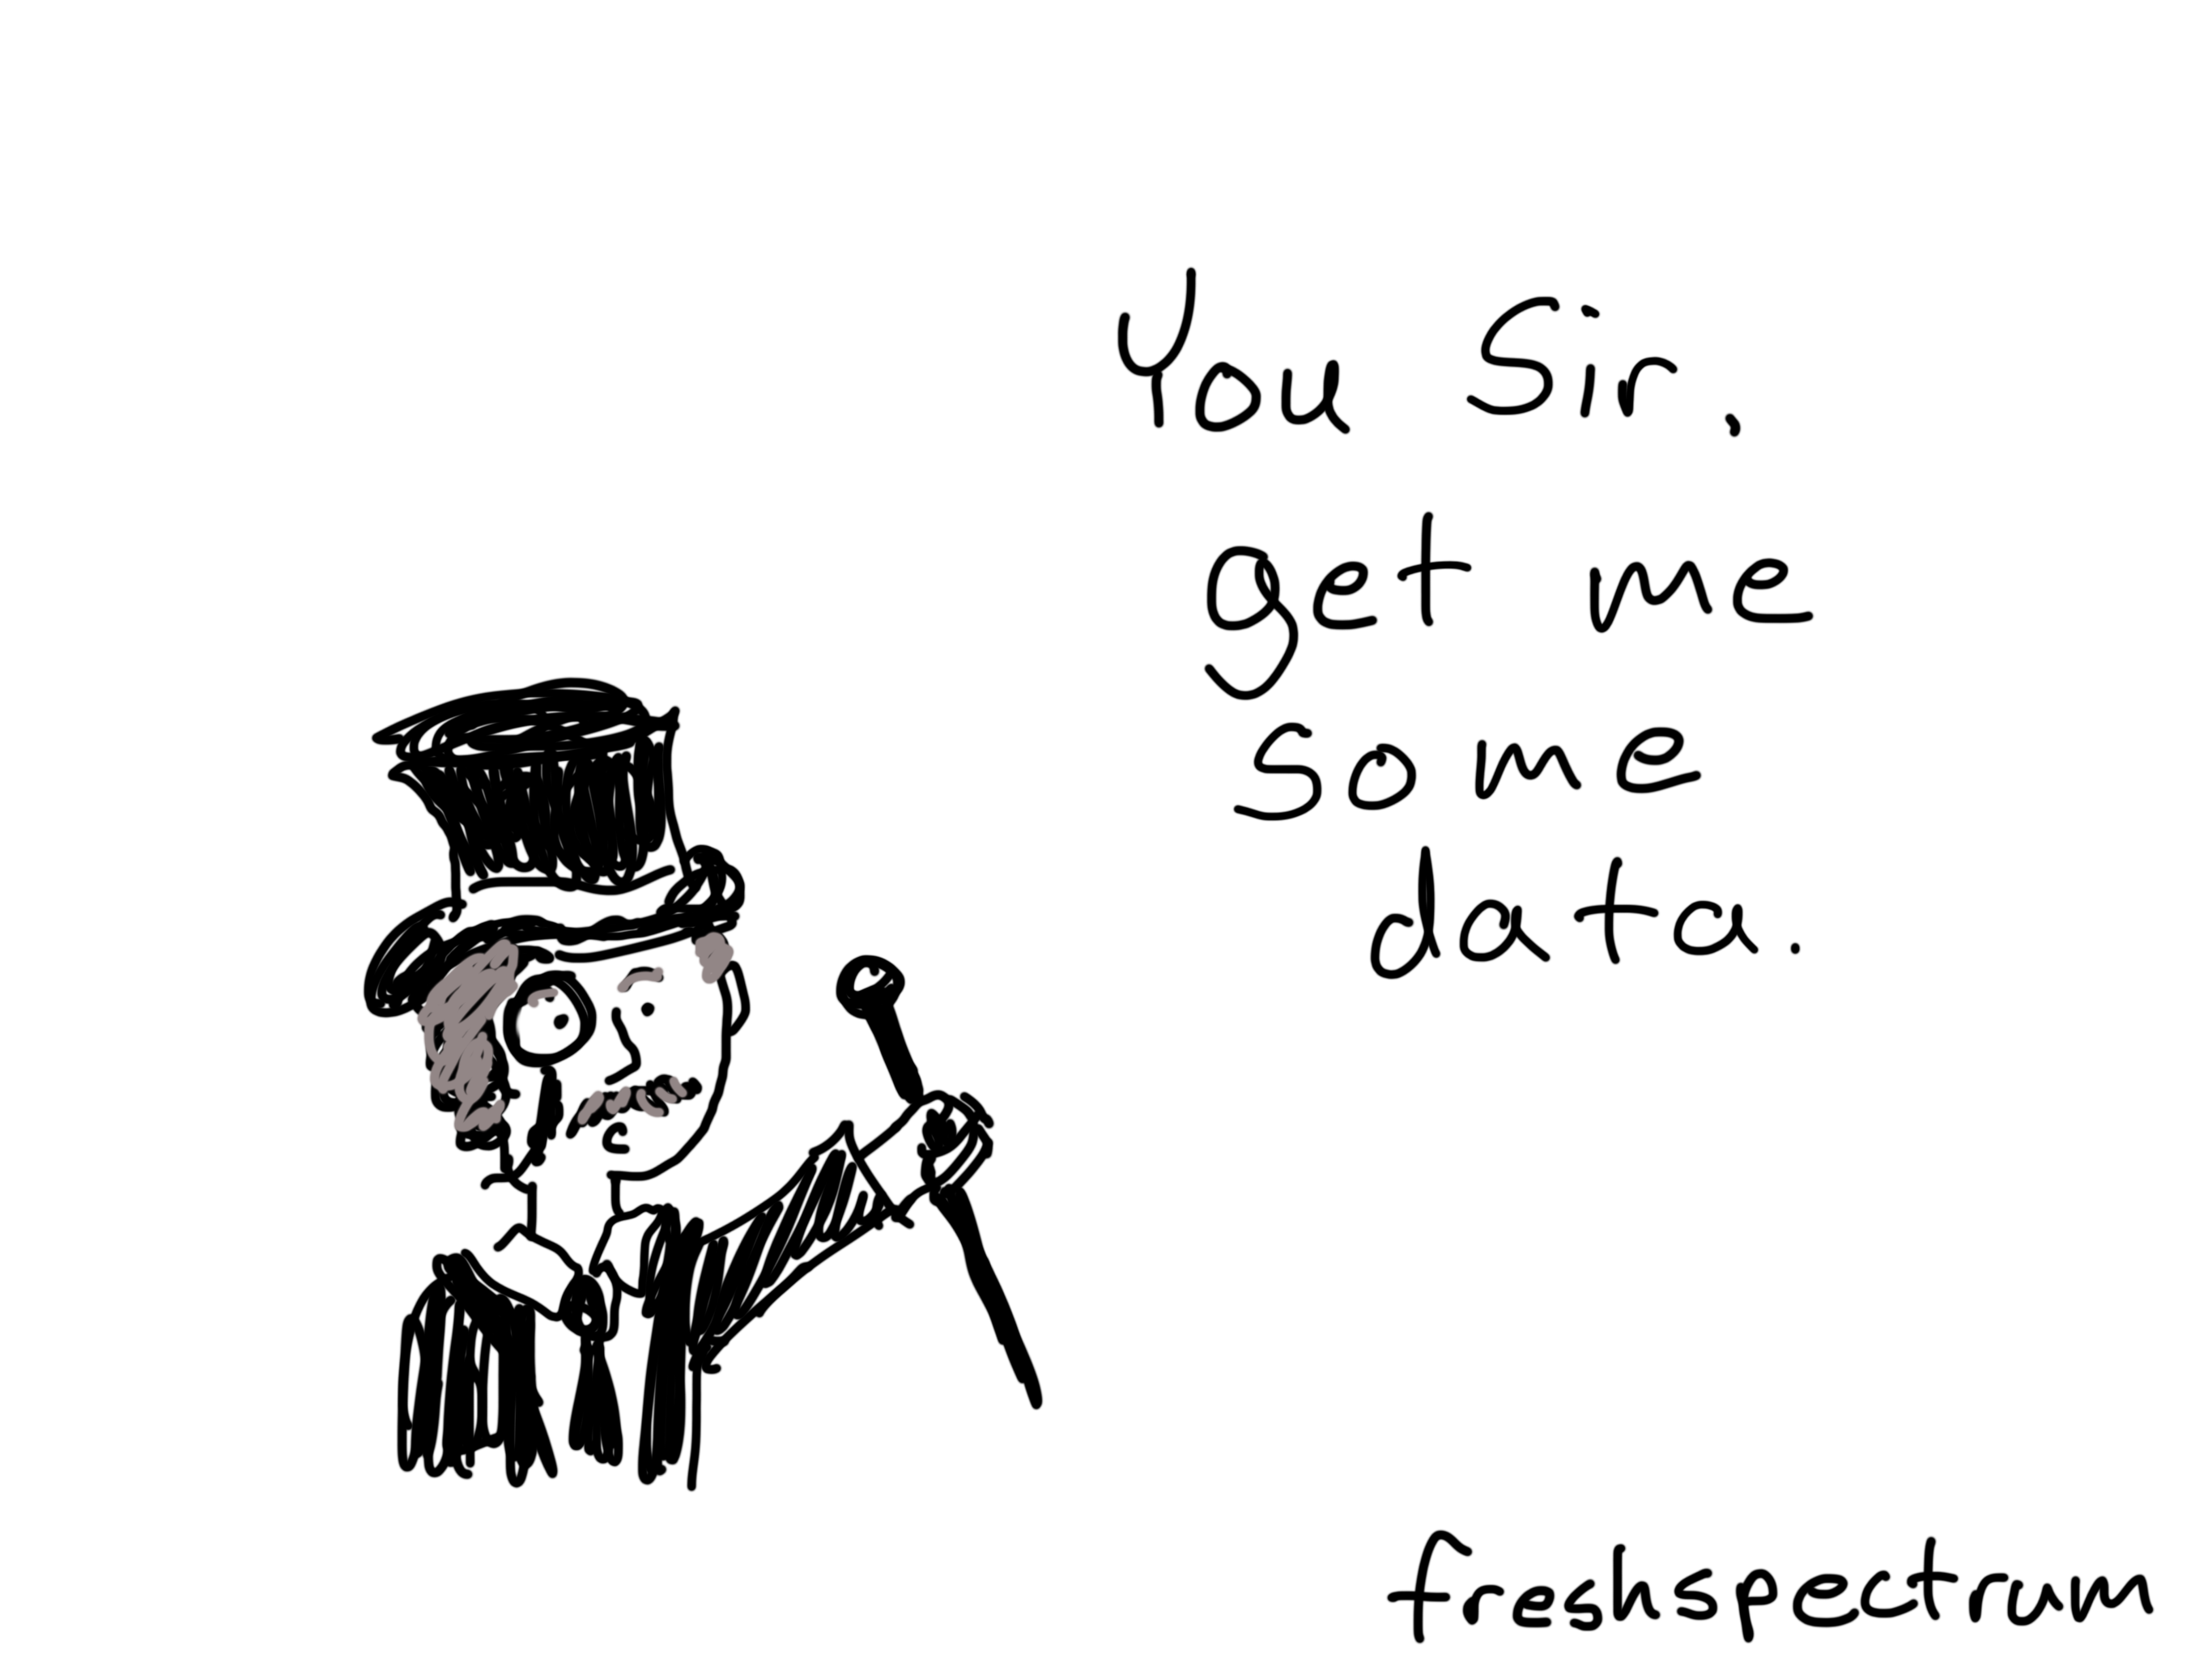 The “You Sir” Data Interface